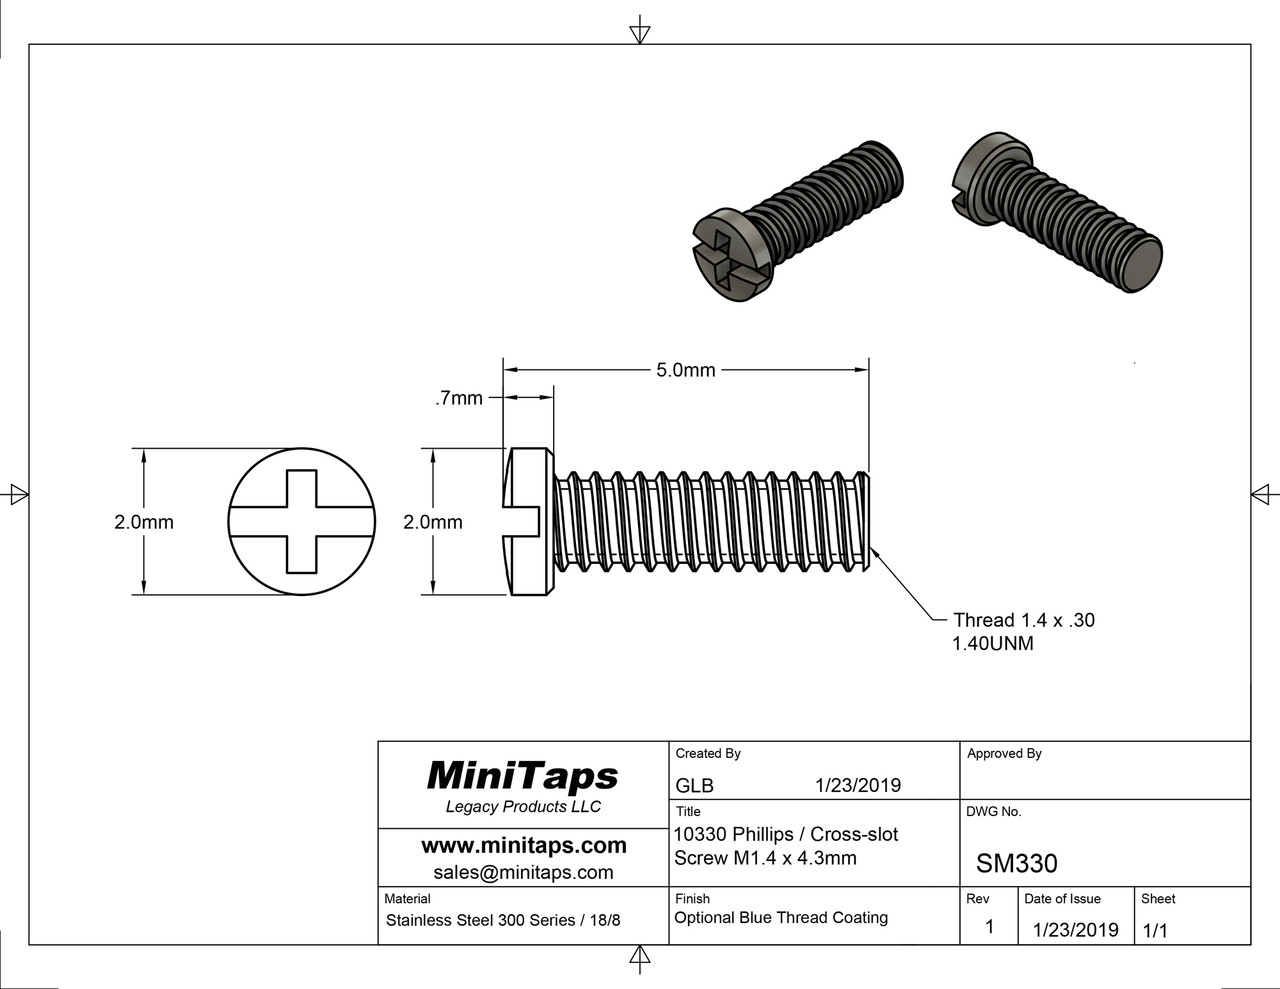 Machine Screw Pan Head with Philips X-Slot Drive

Thread M1.4, Pitch .30mm, Threaded Length 4.3mm, Overall Length 5.0mm, Head 2.0mm

Stainless Steel Colored Matte Black. Jewelry Grade Finish.
Price is for 100 count package with bulk pricing available.